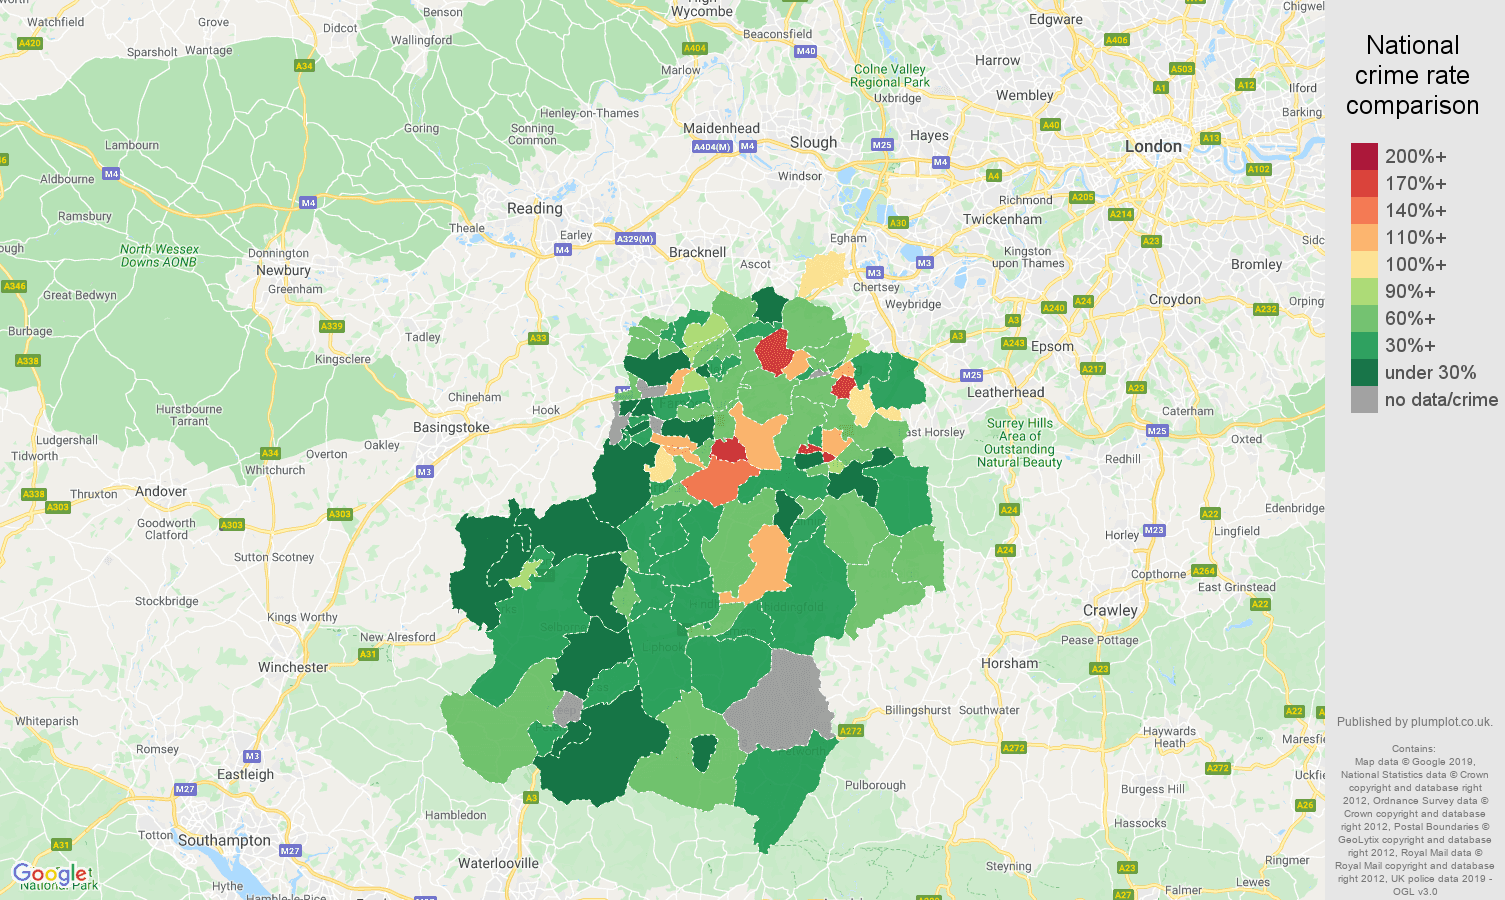 Guildford other crime rate comparison map